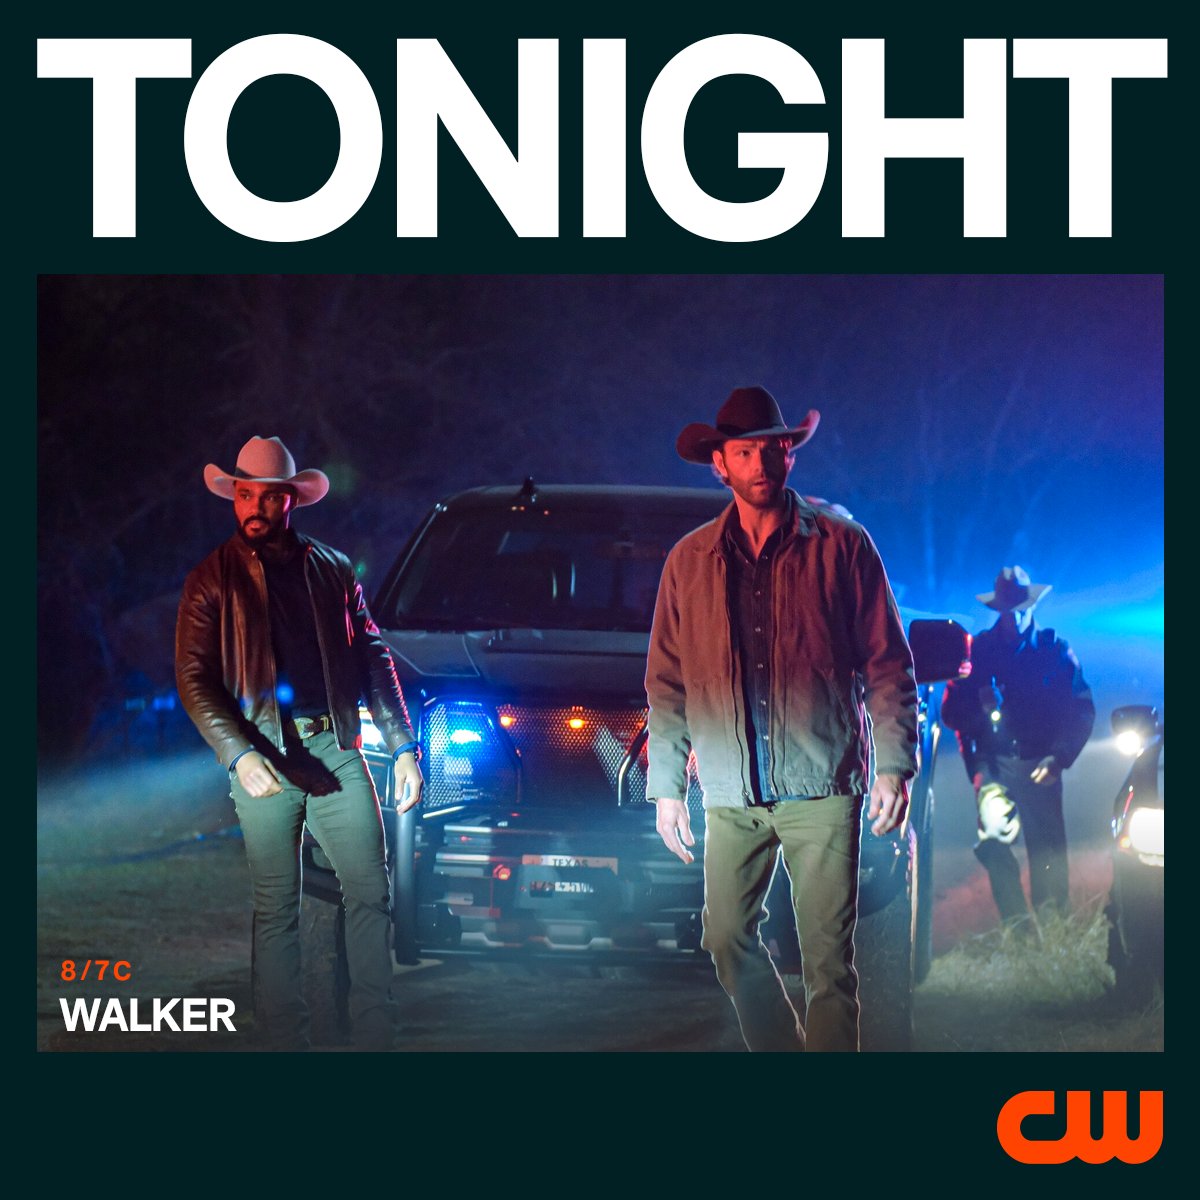 Can they make a break in the investigation? A new episode of #Walker airs TONIGHT at 8/7c on The CW!